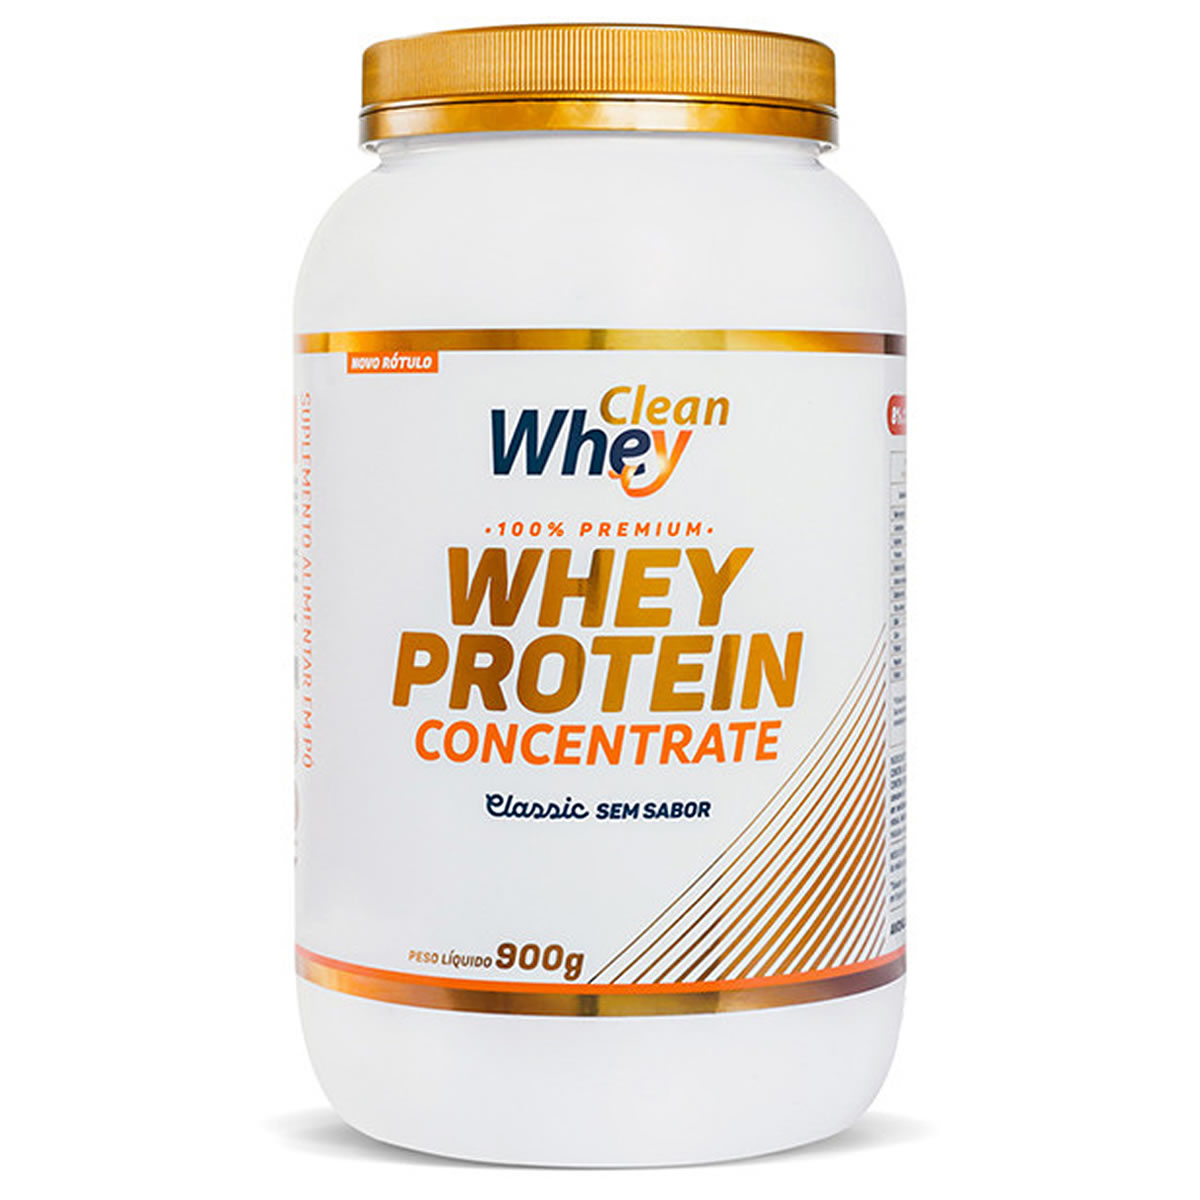 Clean Whey Concentrate 900g - Clean Whey